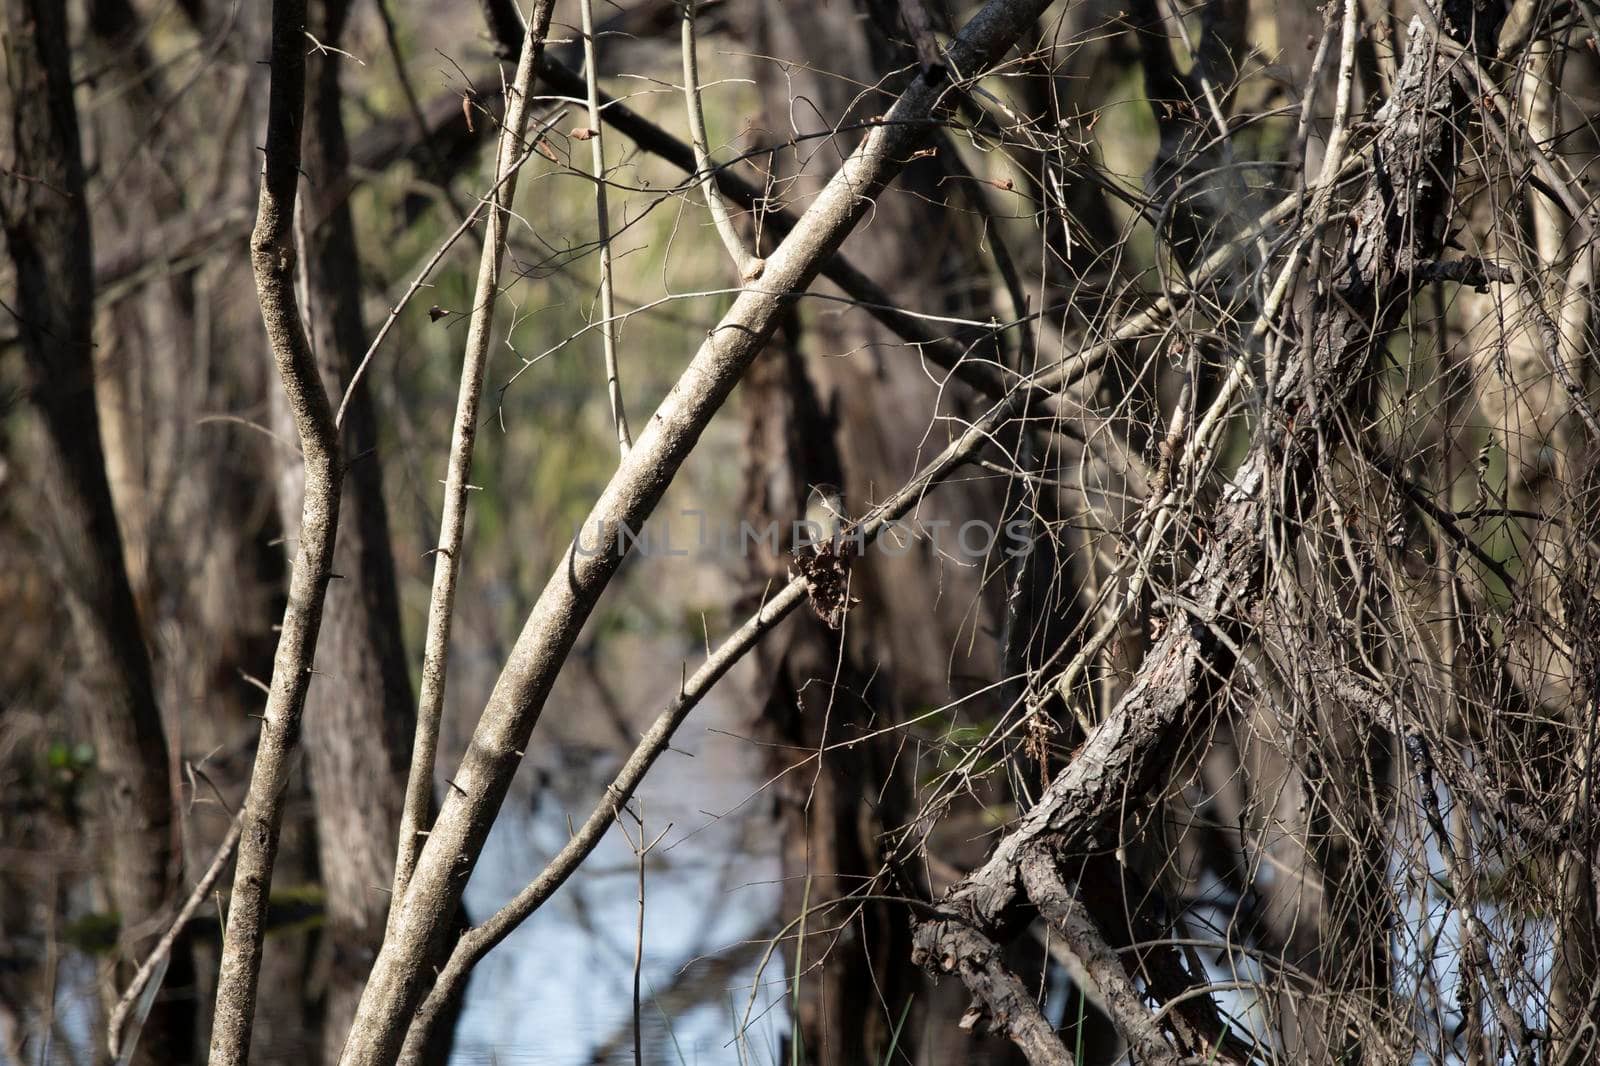 Curious eastern phoebe (Sayornis phoebe) perched in a bare tree